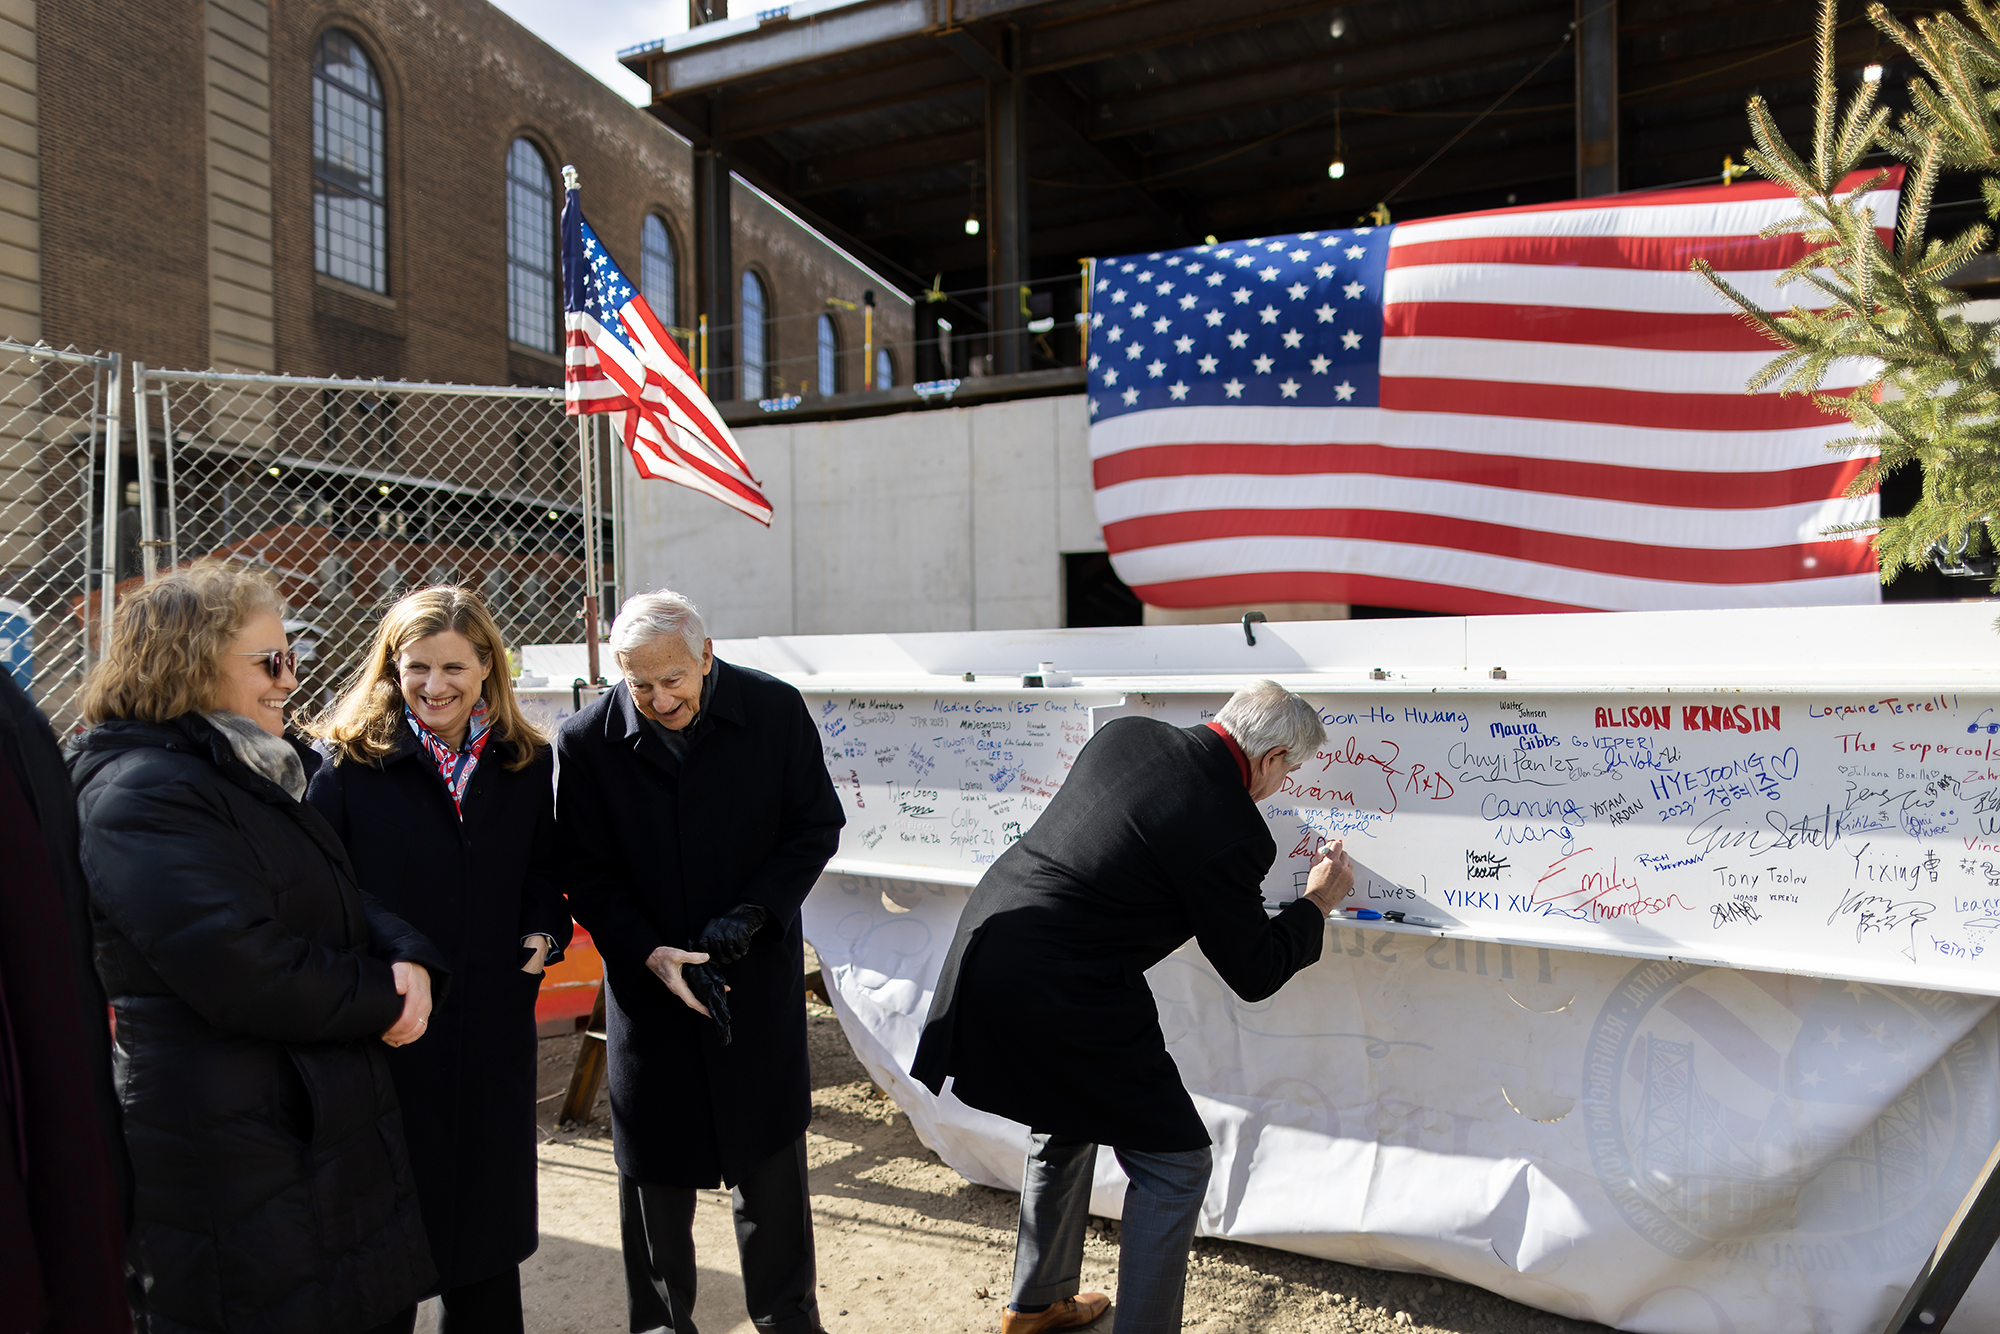 Penn President Liz Magill, Mr. Vagelos, and another person stand on the sidewalk while a fourth person signs the final beam.